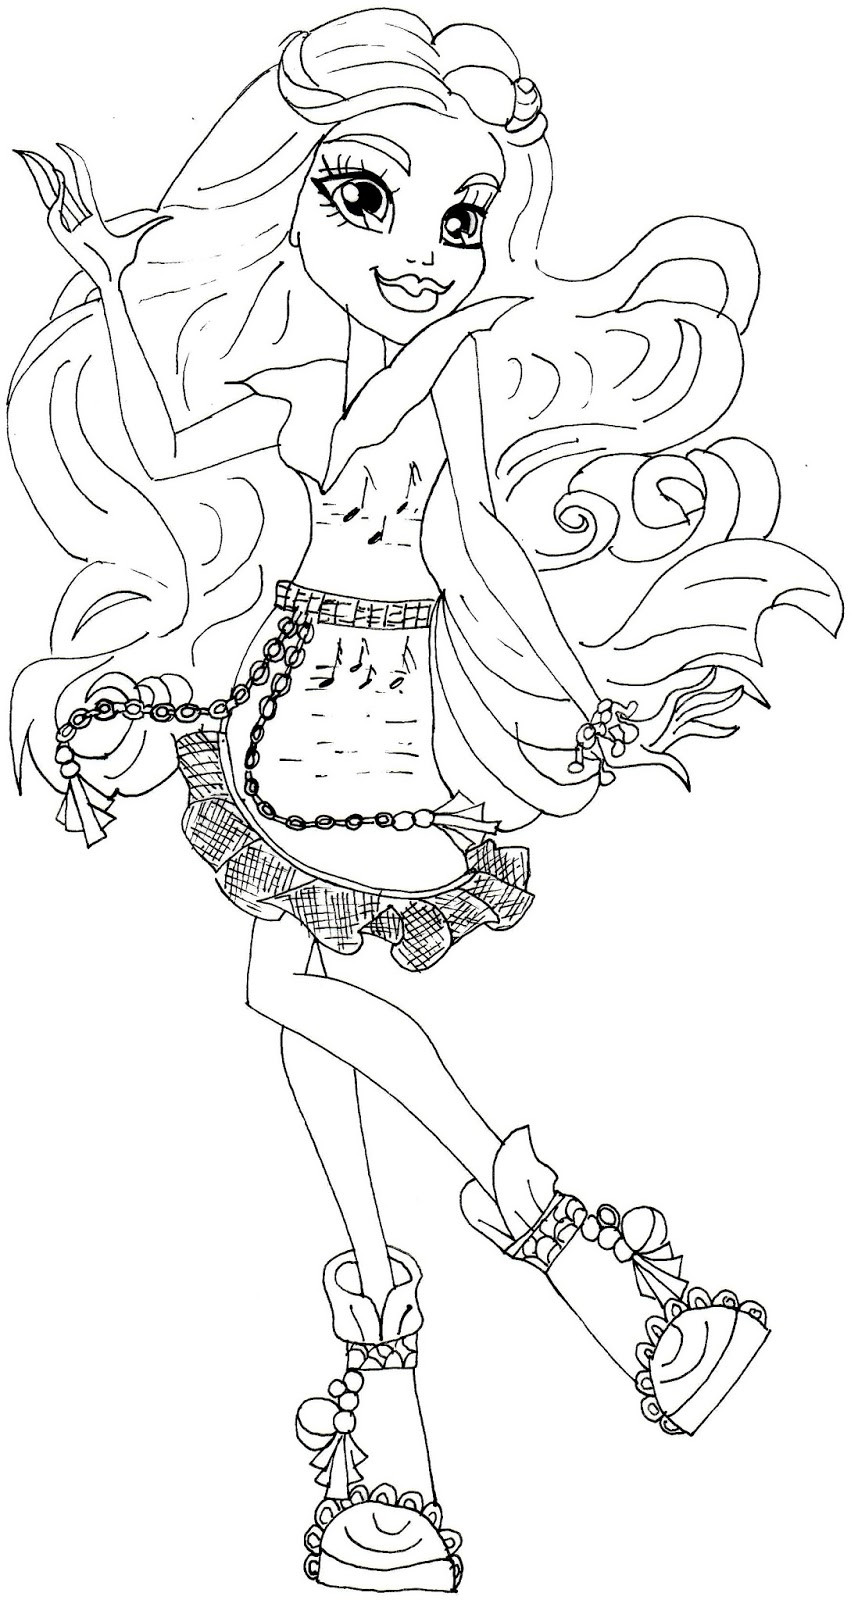 Hellokids Com Coloring Pages
 Print Out Monster High Coloring Pages Hellokids